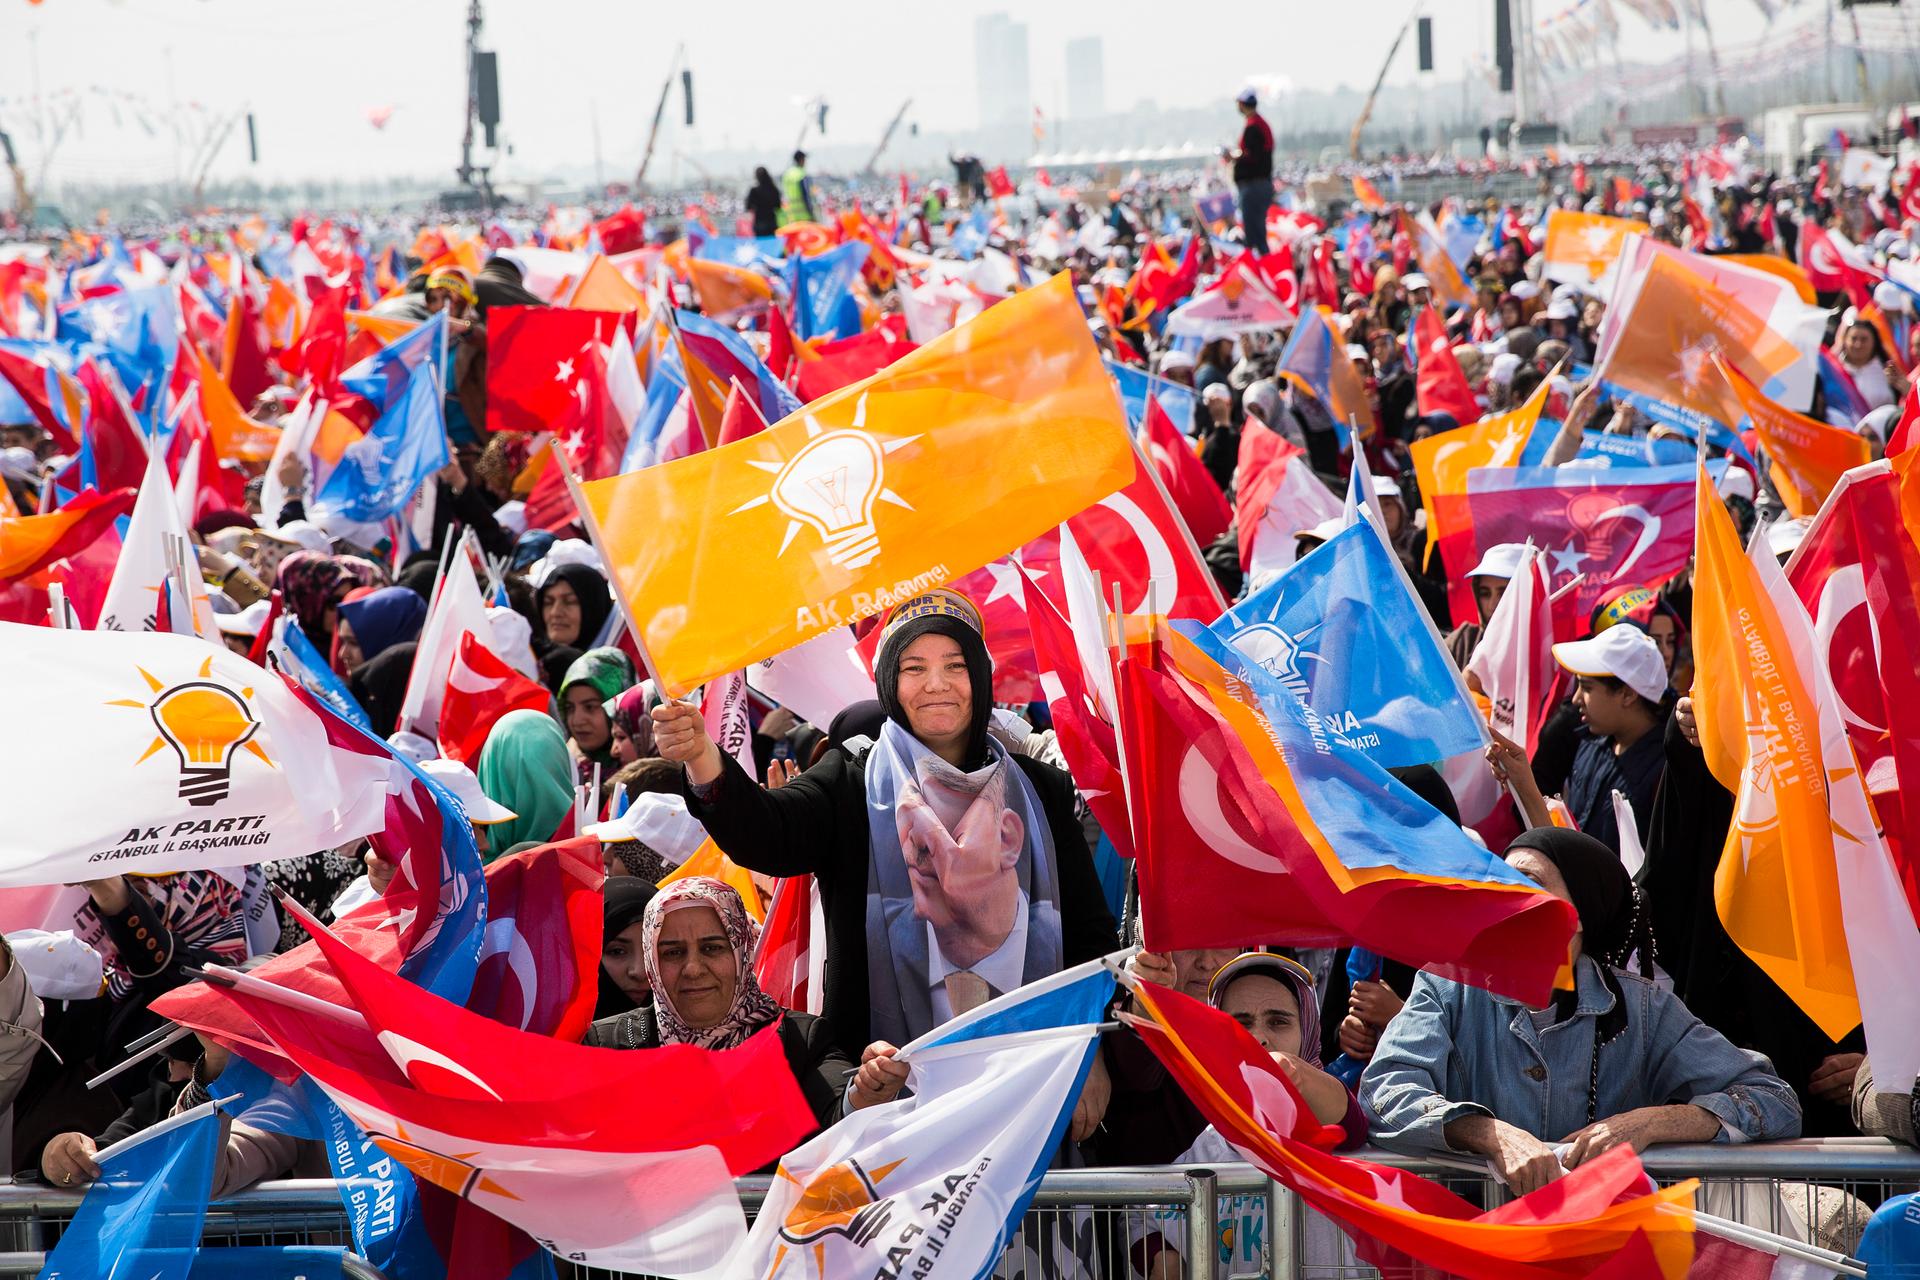 AK Party supporters during a campaign rally in Istanbul. The AKP, Prime Minister Erdogan's Justice and Development Party organized the rally ahead of municipal elections.